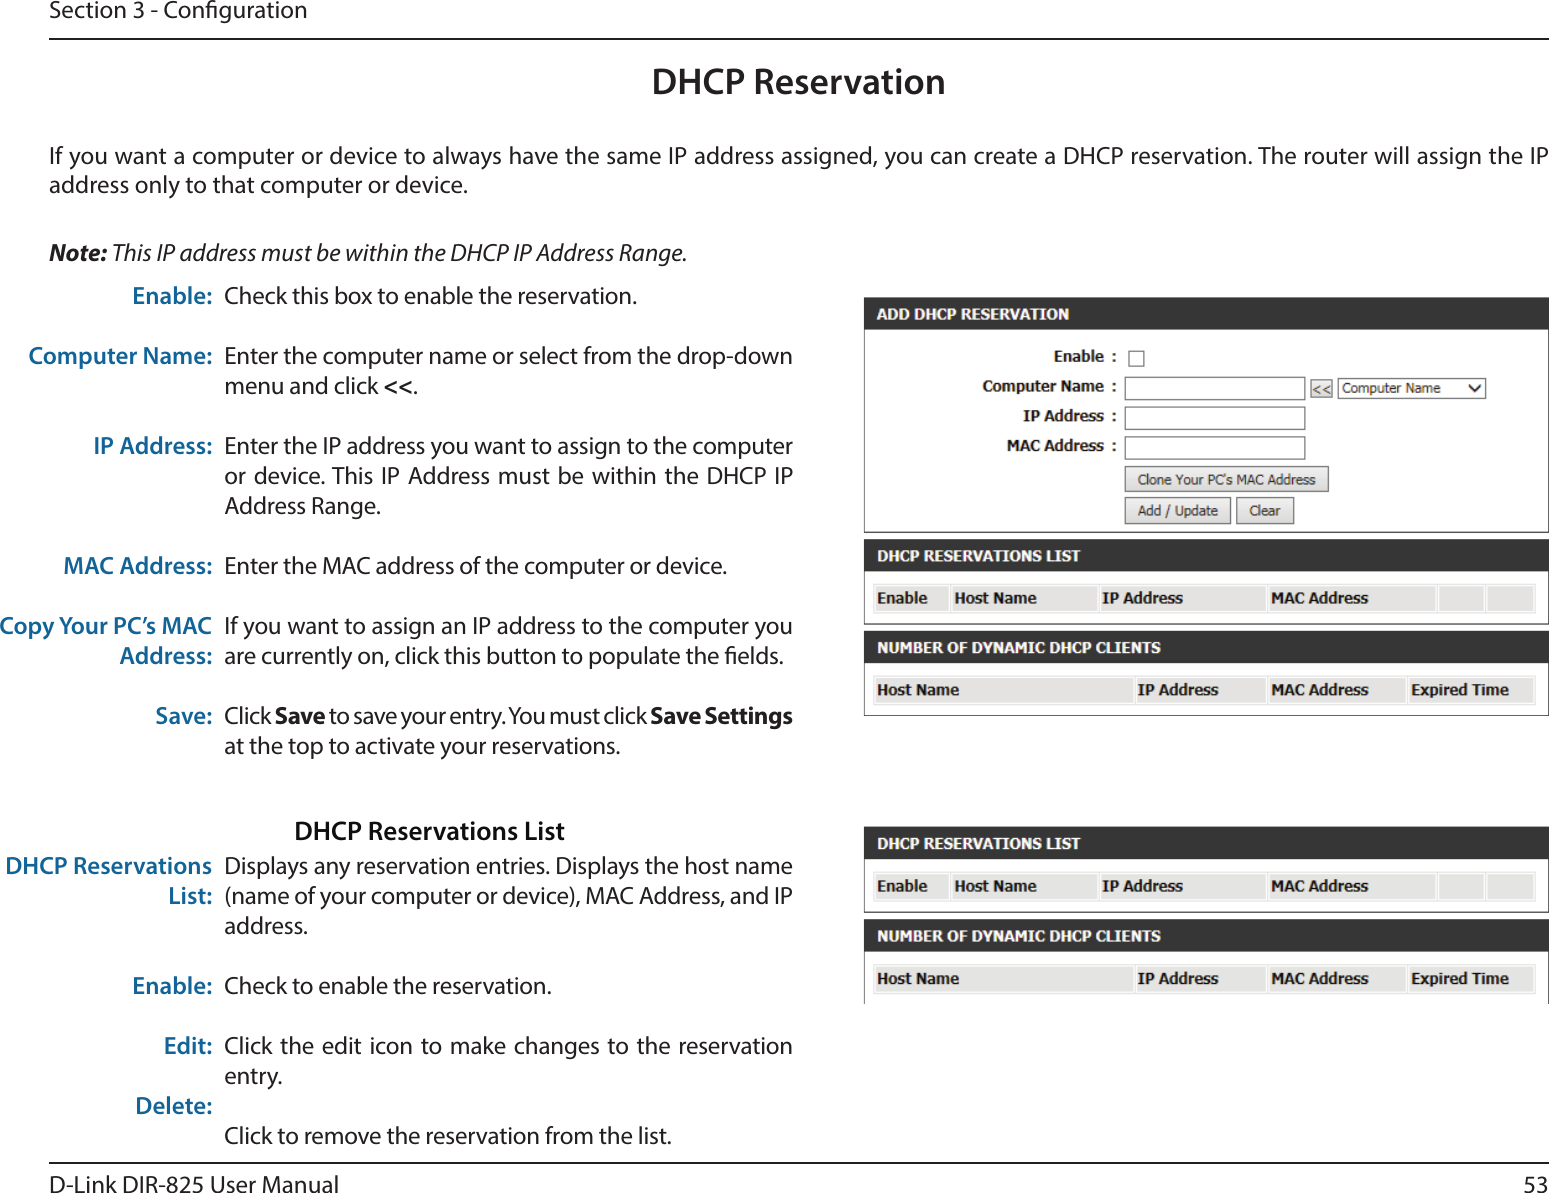 53D-Link DIR-825 User ManualSection 3 - CongurationDHCP ReservationIf you want a computer or device to always have the same IP address assigned, you can create a DHCP reservation. The router will assign the IP address only to that computer or device. Note: This IP address must be within the DHCP IP Address Range.Check this box to enable the reservation.Enter the computer name or select from the drop-down menu and click &lt;&lt;.Enter the IP address you want to assign to the computer or device. This IP Address must be within the DHCP IP Address Range.Enter the MAC address of the computer or device.If you want to assign an IP address to the computer you are currently on, click this button to populate the elds. Click Save to save your entry. You must click Save Settings at the top to activate your reservations. Displays any reservation entries. Displays the host name (name of your computer or device), MAC Address, and IP address.Check to enable the reservation.Click the edit icon to make changes to the reservation entry.Click to remove the reservation from the list.Enable:Computer Name:IP Address:MAC Address:Copy Your PC’s MAC Address:Save:DHCP Reservations List:Enable:Edit:Delete:DHCP Reservations List